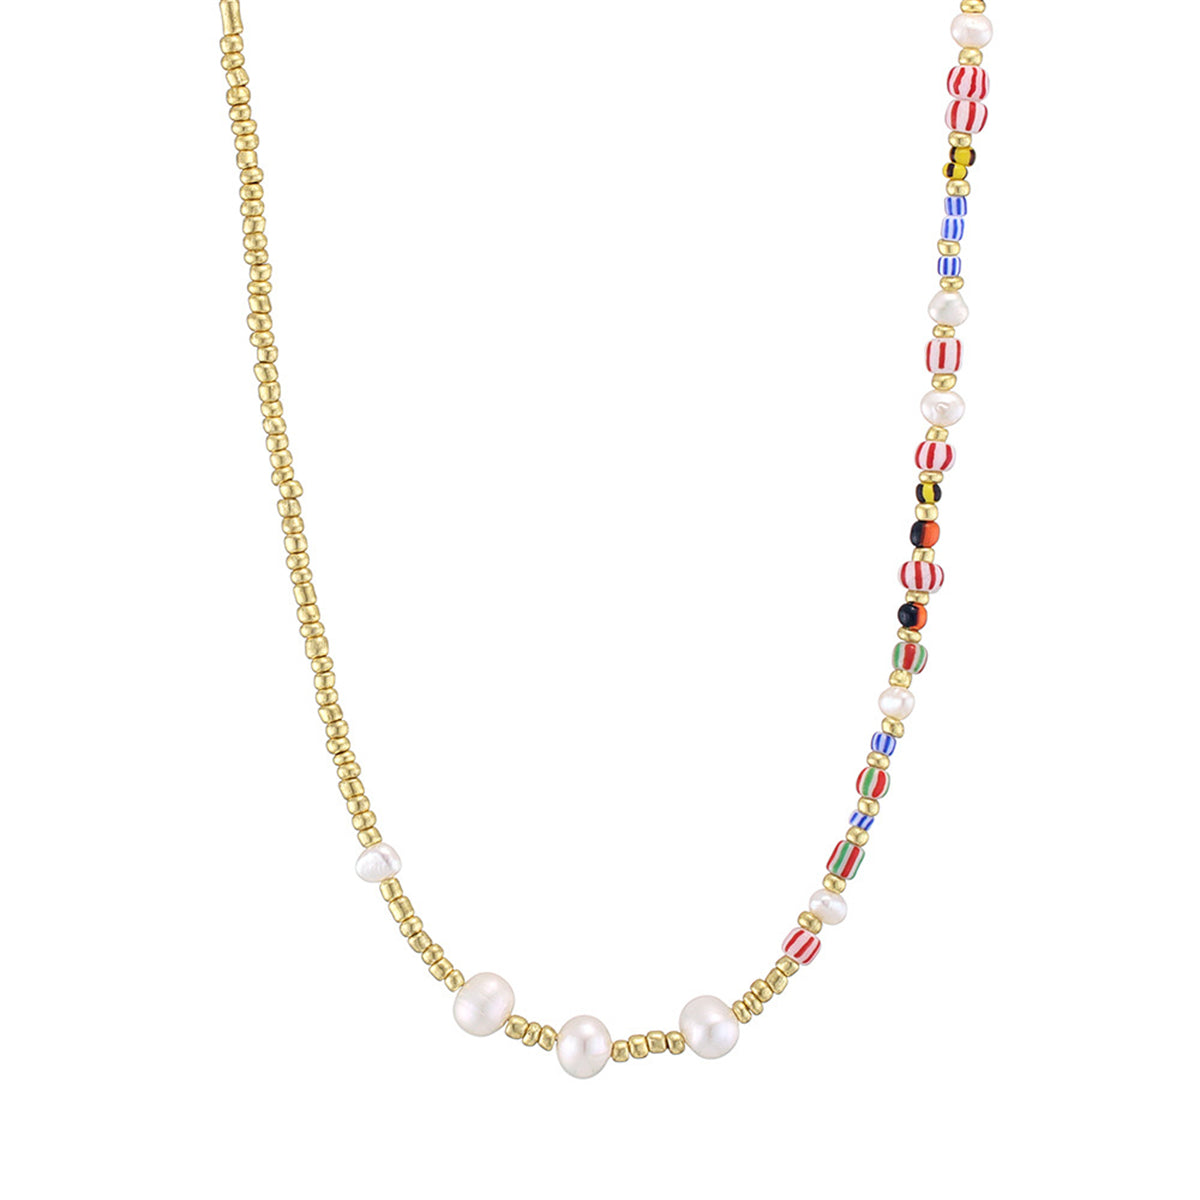 Pearl & Acrylic 18K Gold-Plated Bead Chain Necklace